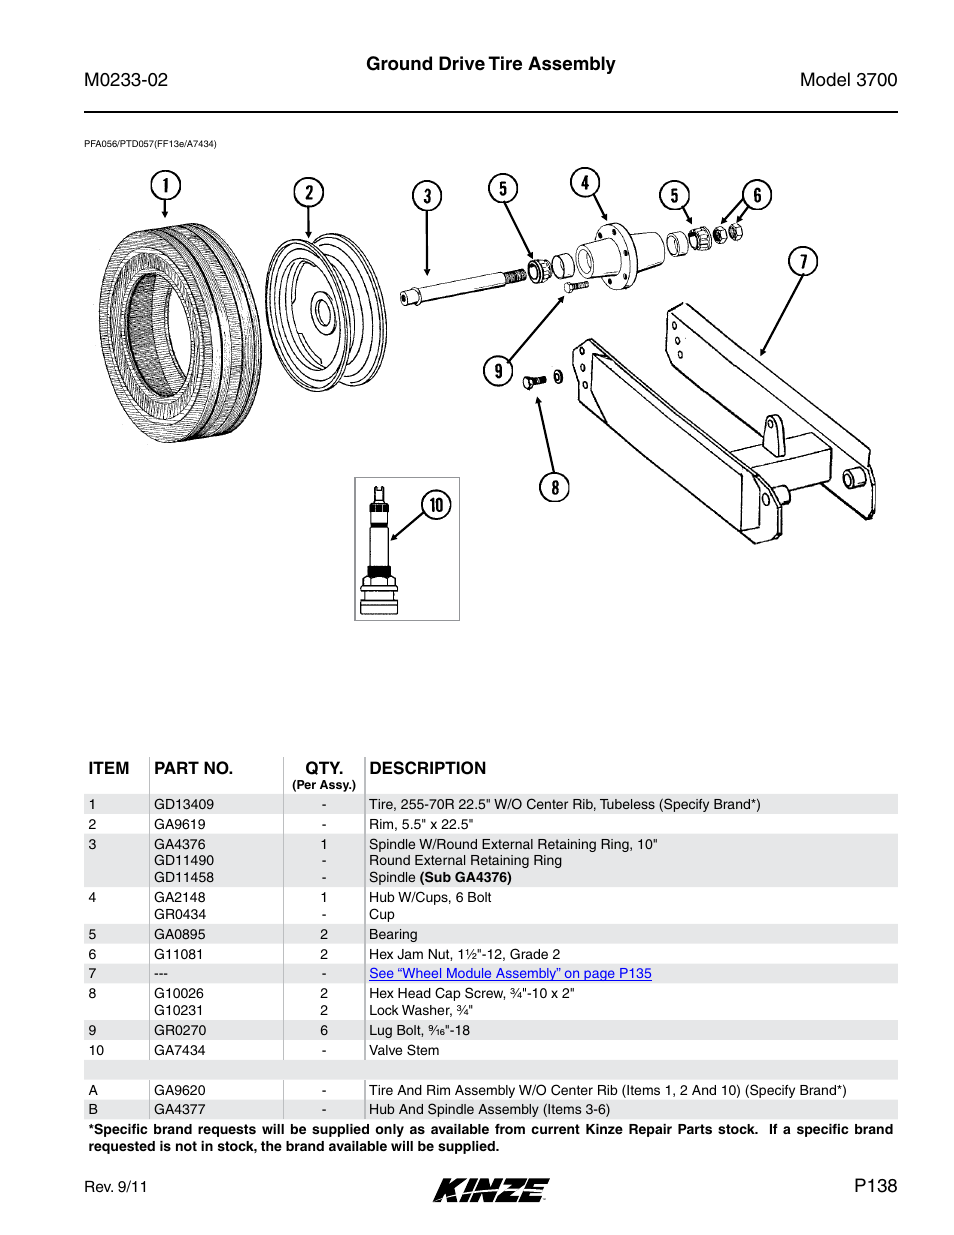 Ground drive tire assembly, P138 | Kinze 3700 Front Folding Planter Rev. 6/14 User Manual | Page 141 / 284